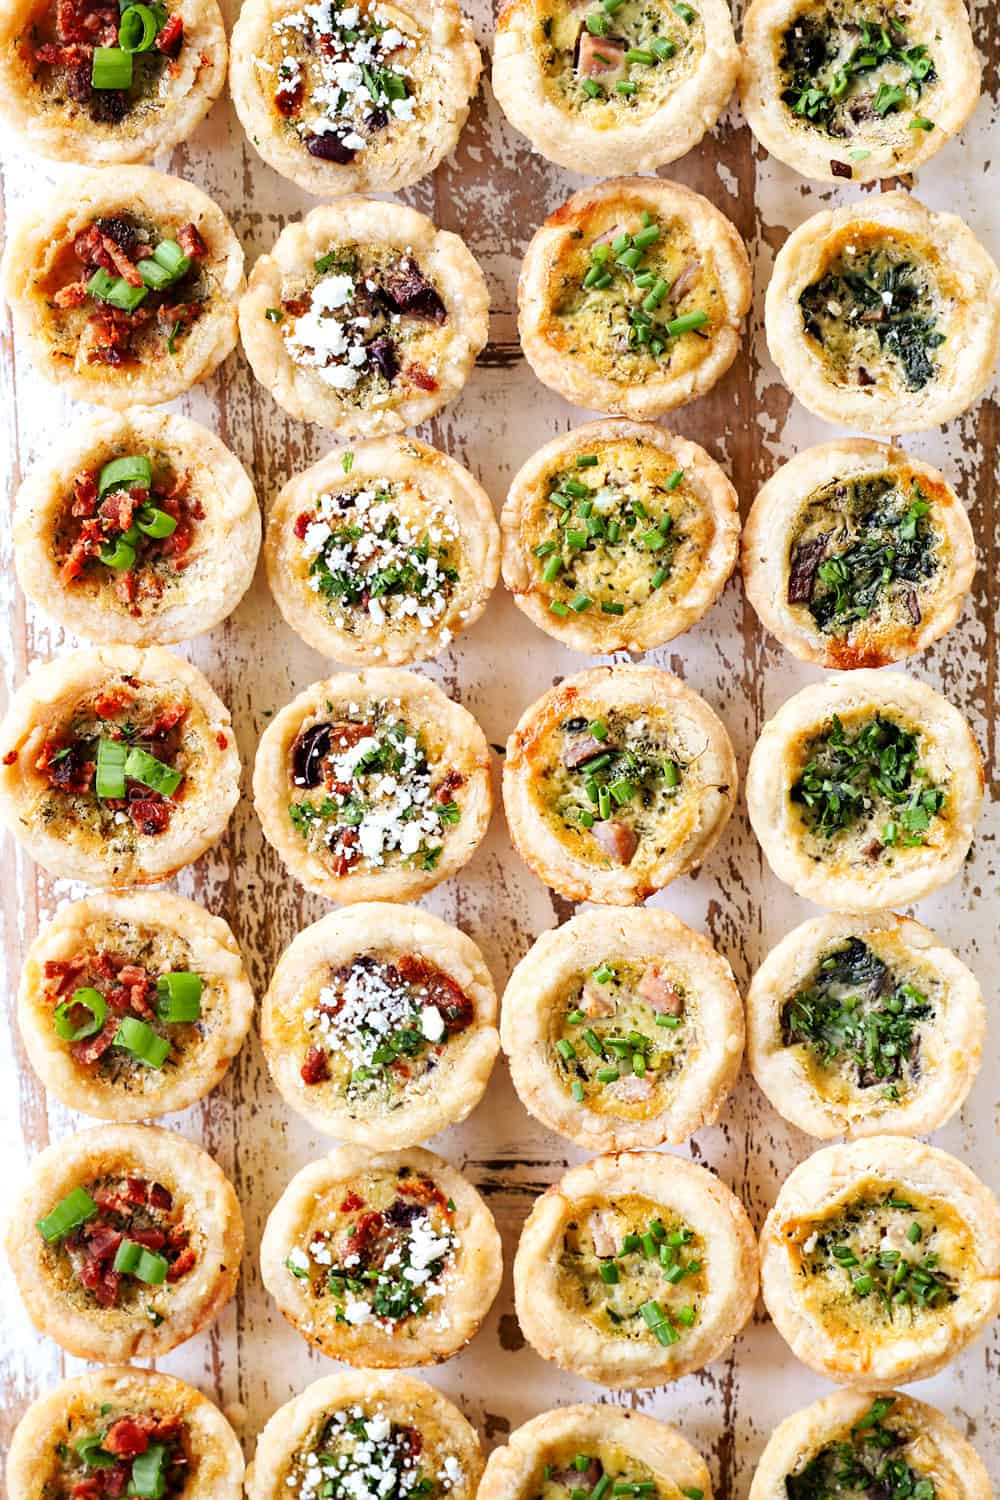 4 rows of mini quiche showing the different kinds to make in this recipe